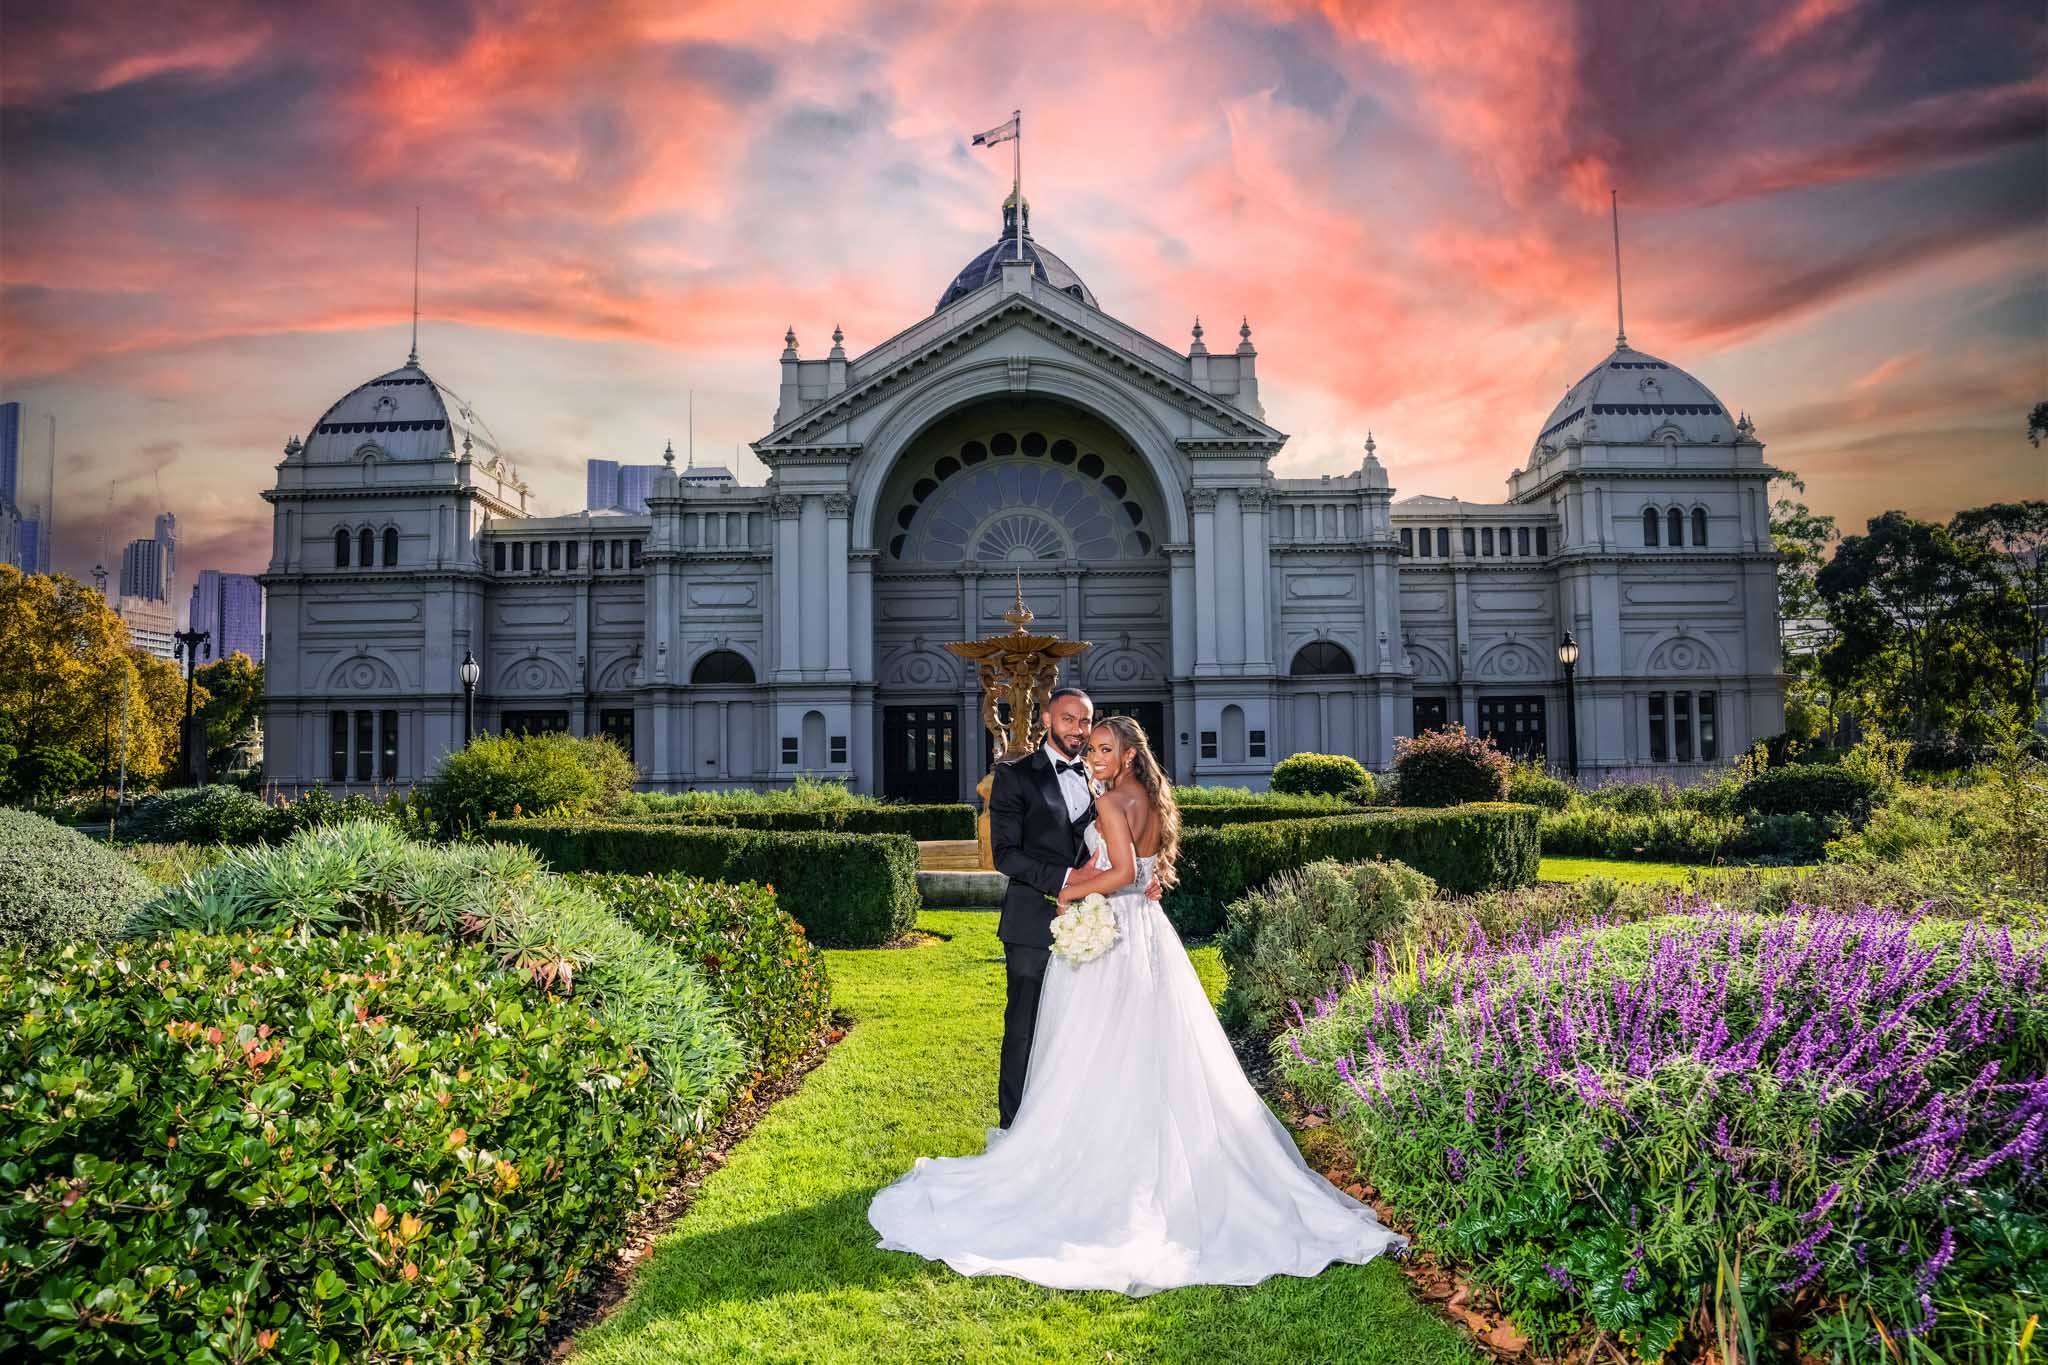 Melbourne Wedding Photography and Videography